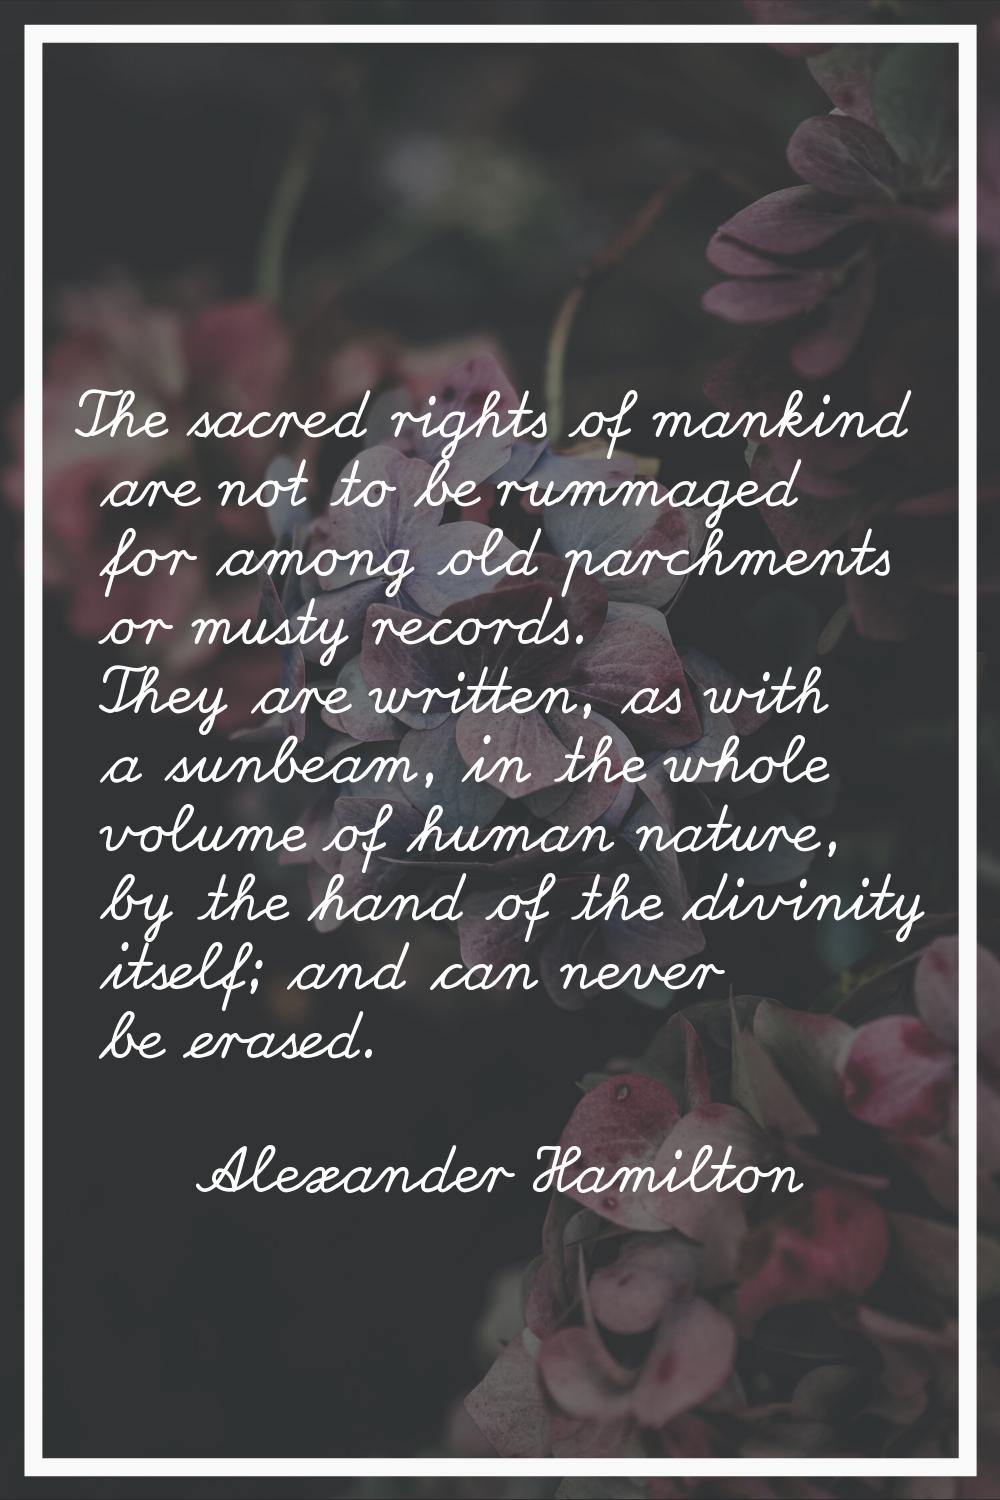 The sacred rights of mankind are not to be rummaged for among old parchments or musty records. They